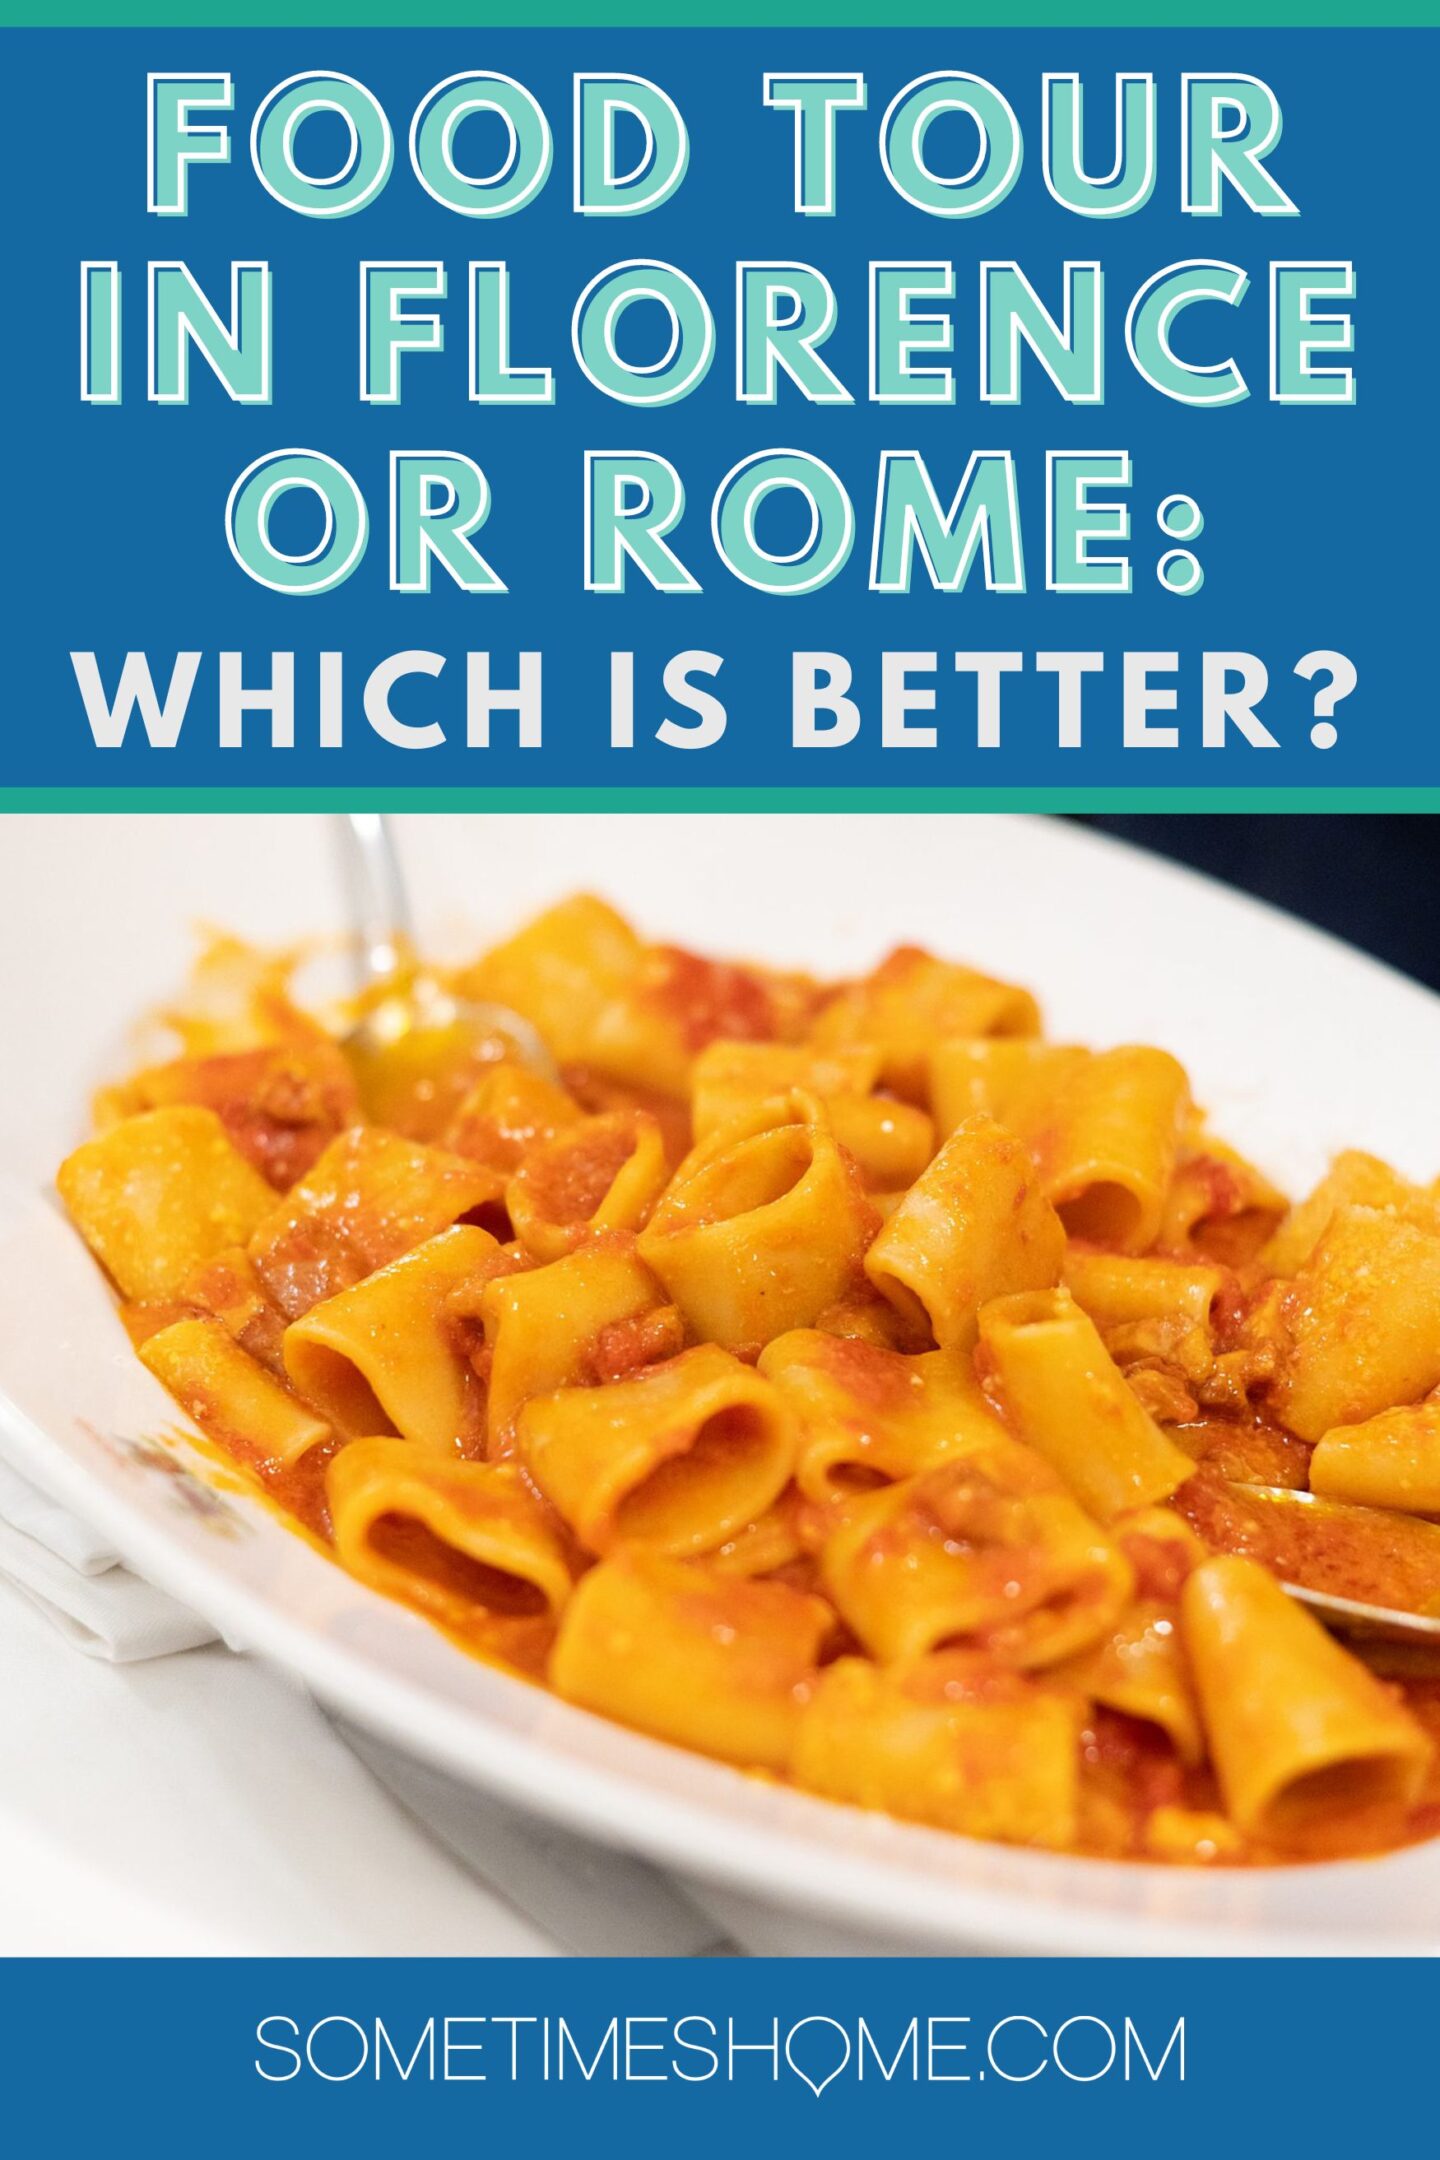 Food tour in Florence or Rome: Which is Better? with a picture of a plate of pasta.